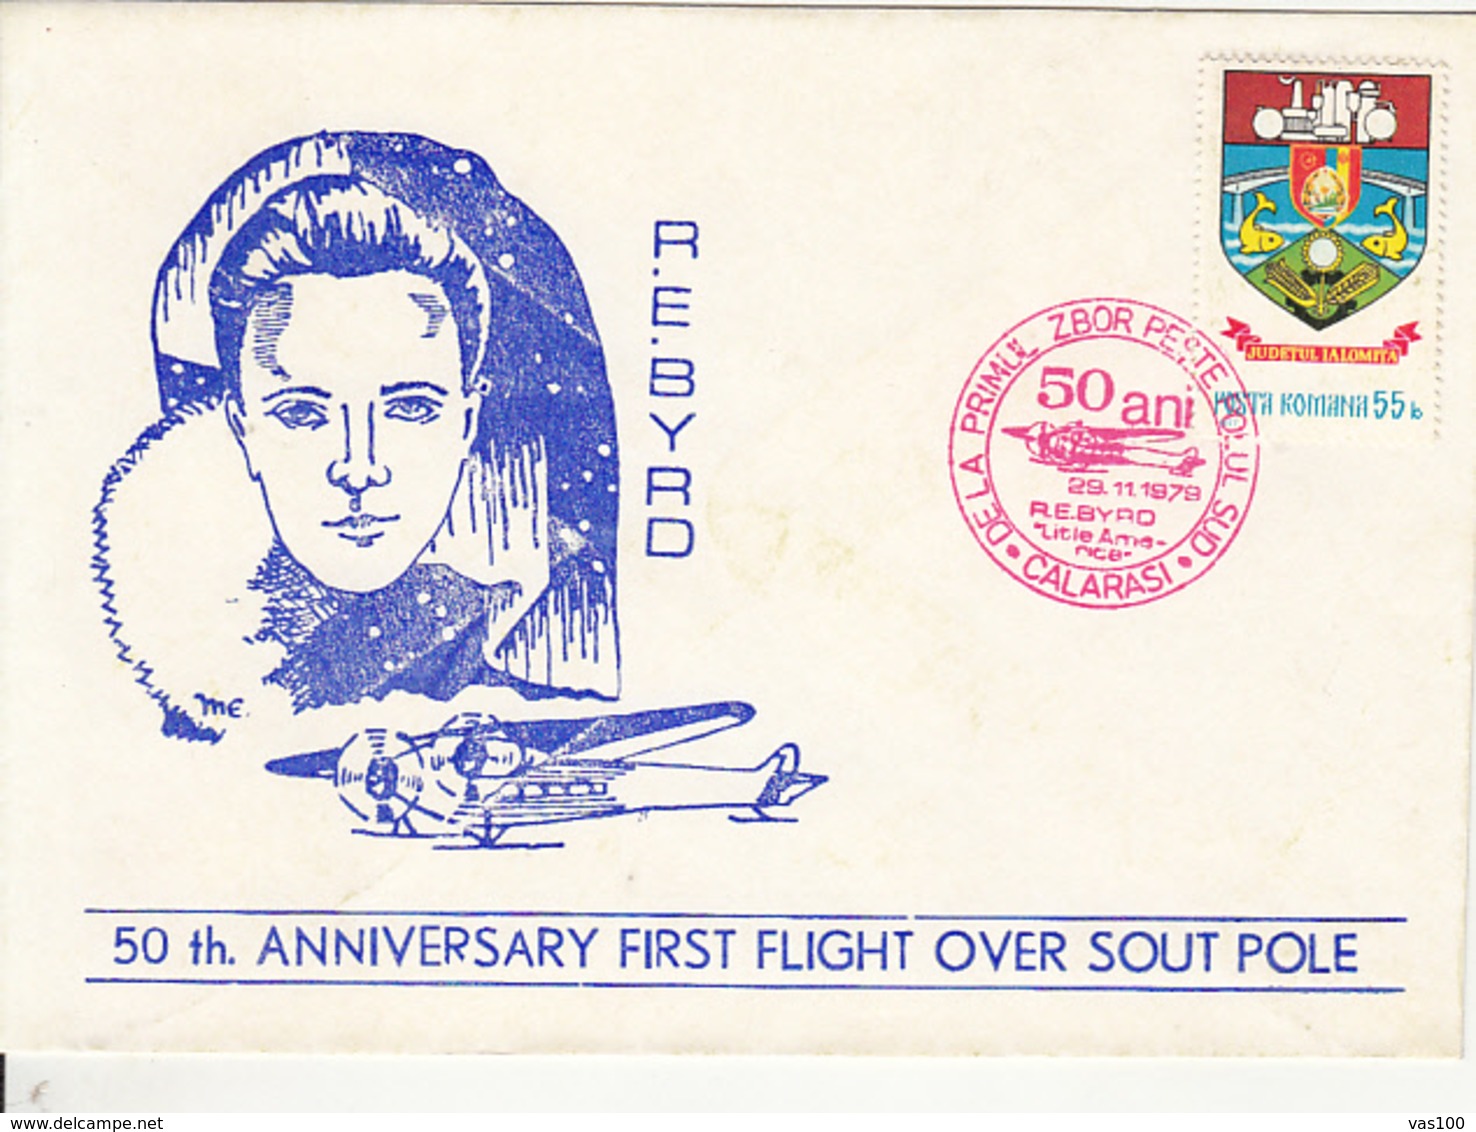 POLAR FLIGHTS, RICHARD E. BYRD FIRST FLIGHT OVER SOUTH POLE, PLANE, SPECIAL COVER, 1979, ROMANIA - Vols Polaires